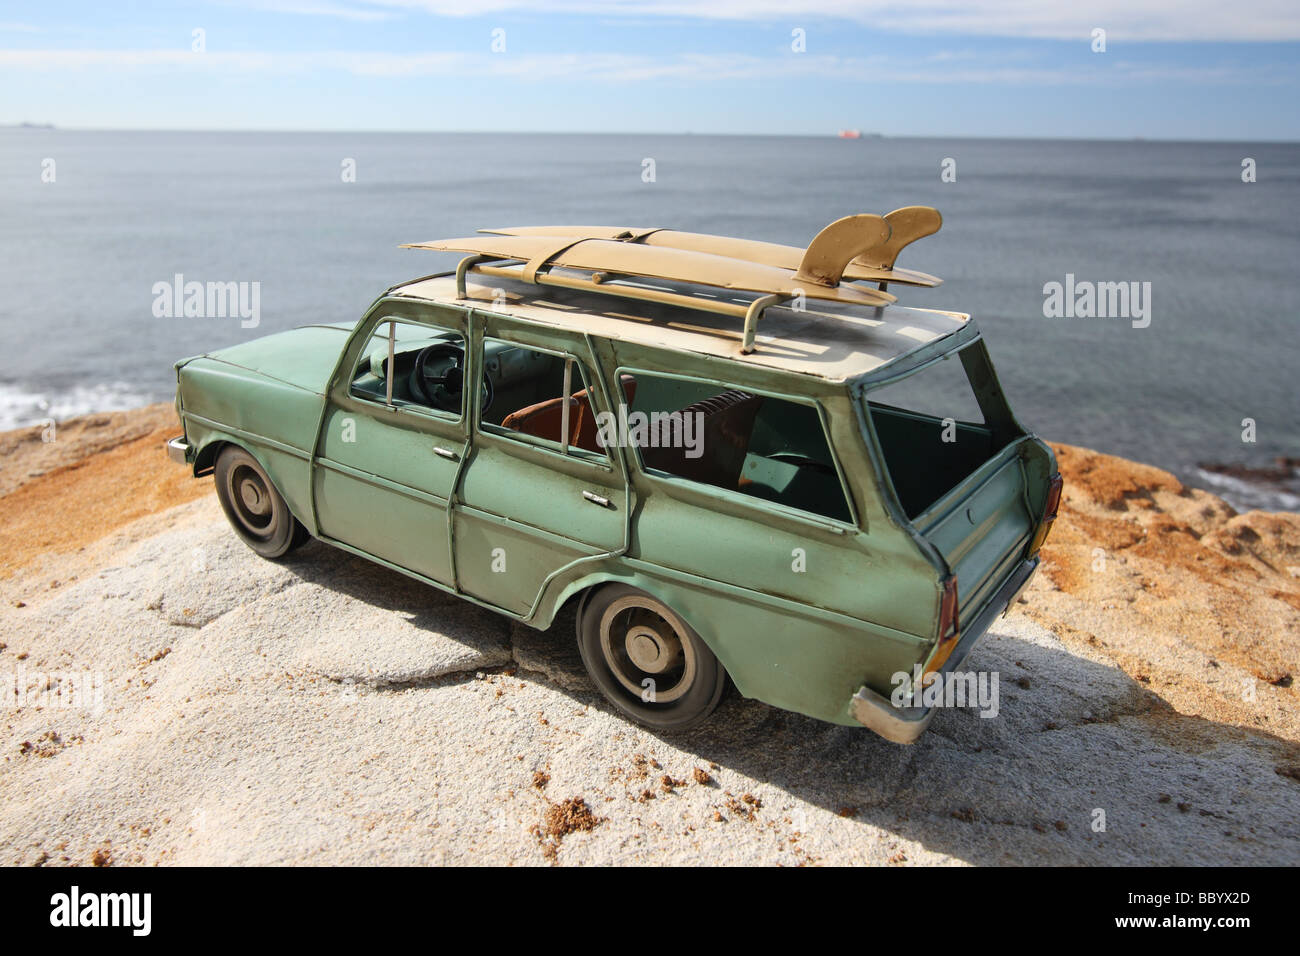 BEATEN UP OLD MODEL STATION WAGON WITH SURFBOARDS ON TOP BDB11230 HORIZONTAL Stock Photo